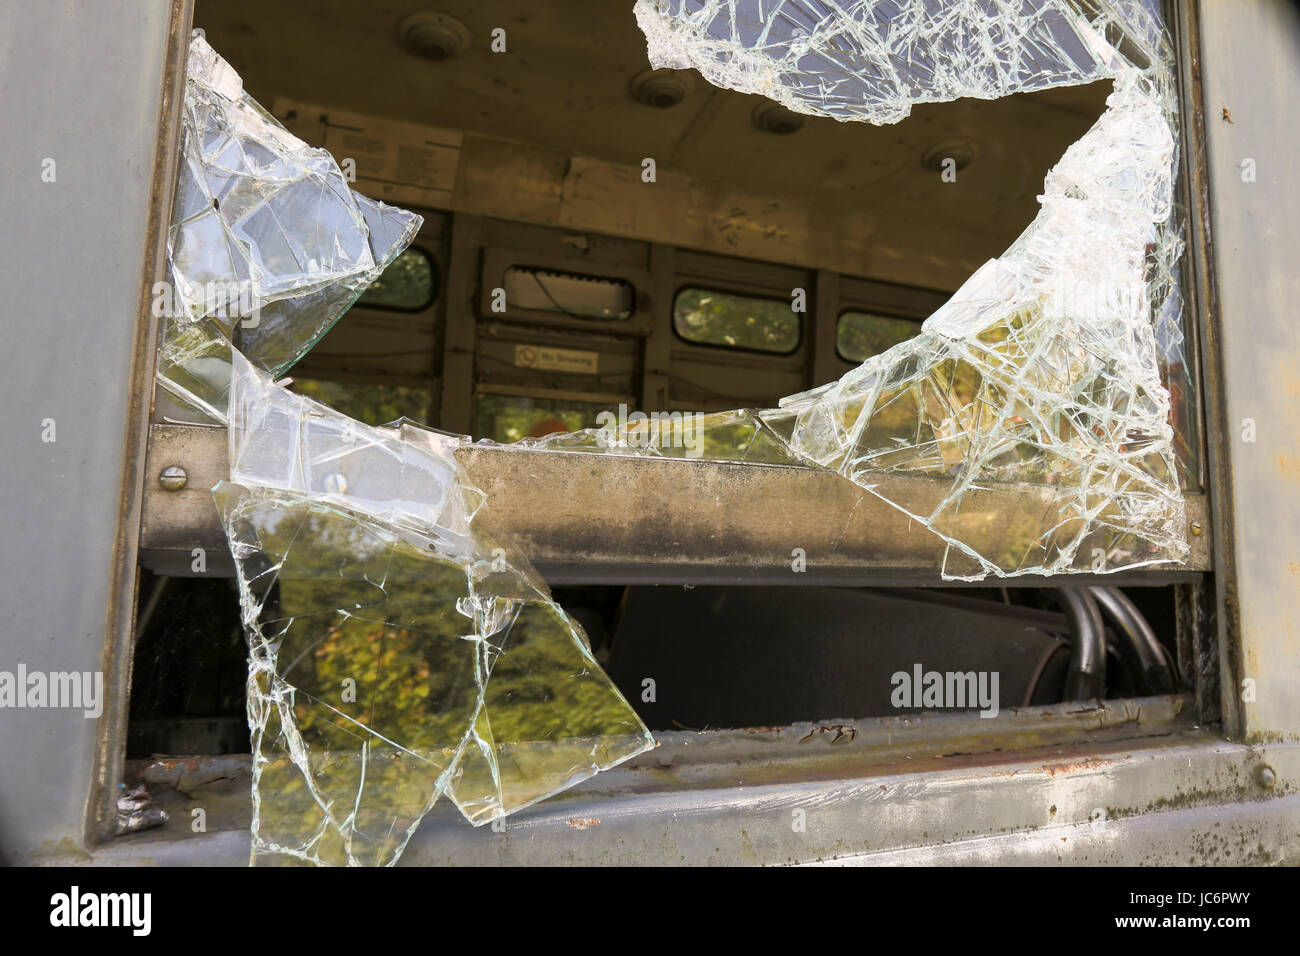 Close up of broken safety glass in window of commuter train car. Stock Photo